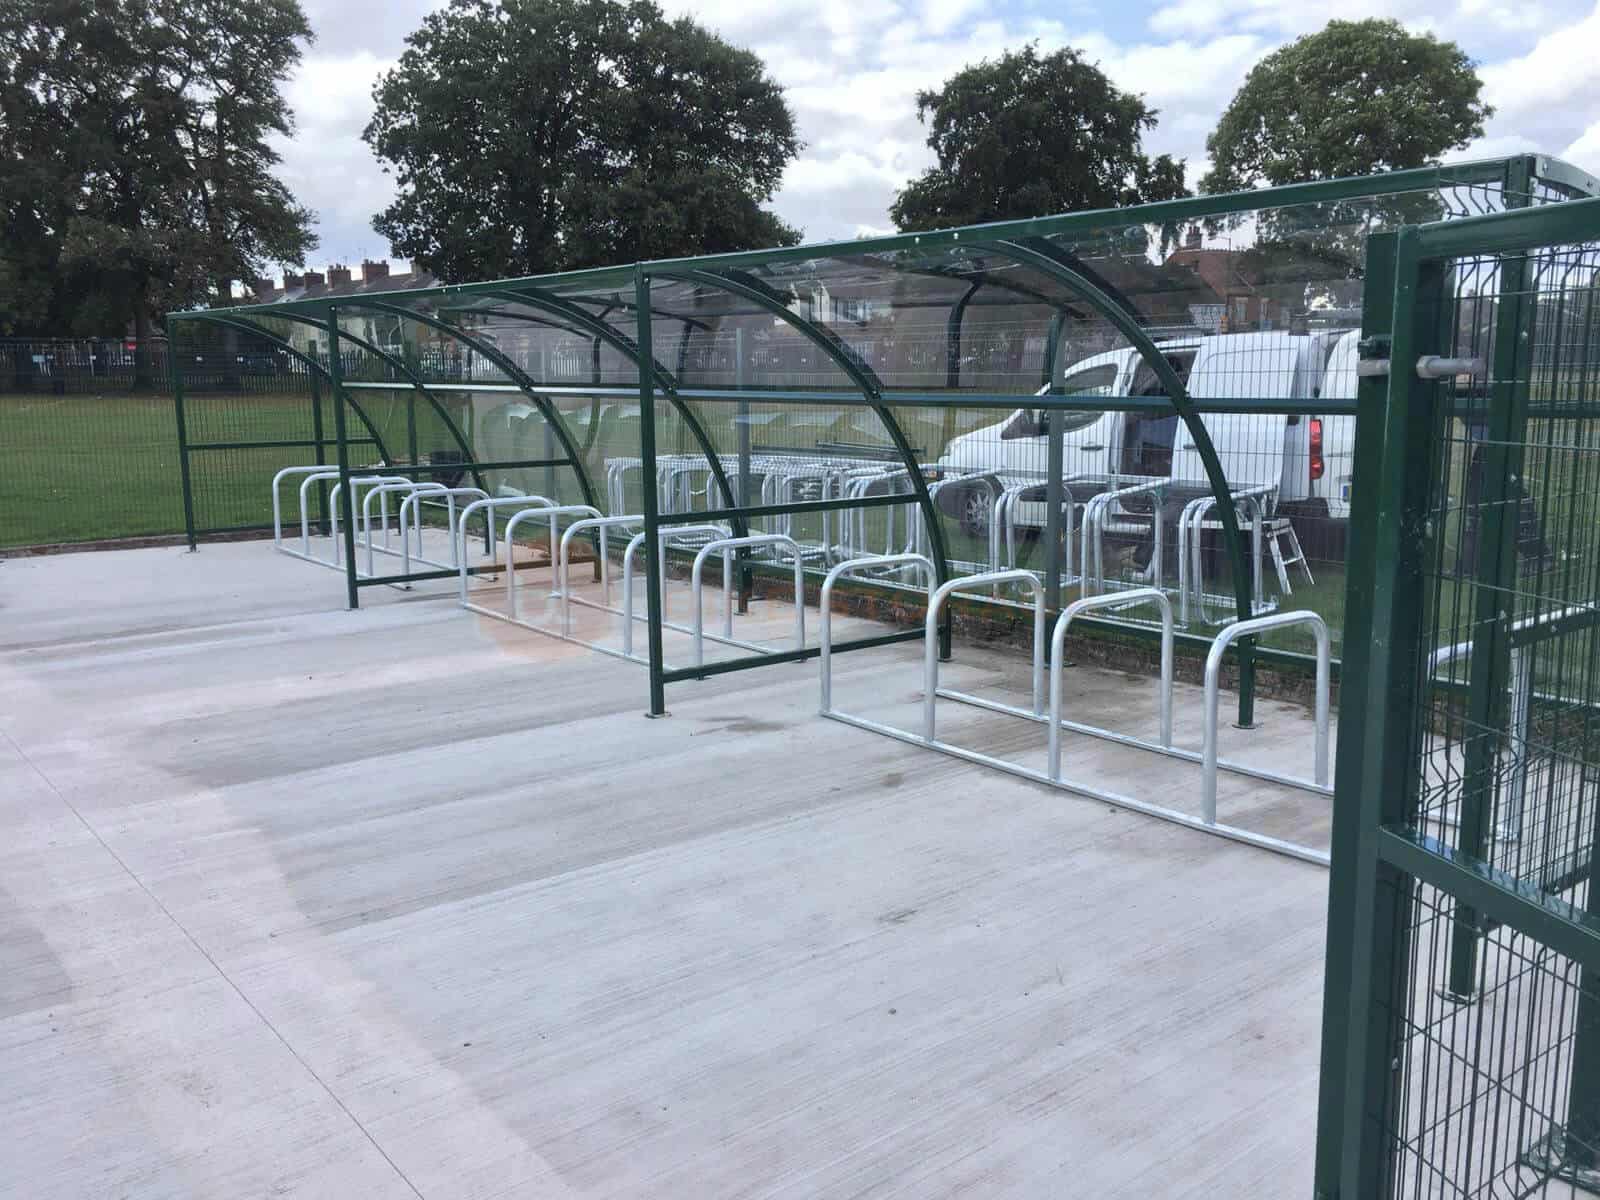 Paladin Mesh Fencing enclosure with 10 space Original Bike Shelters and Toastracks